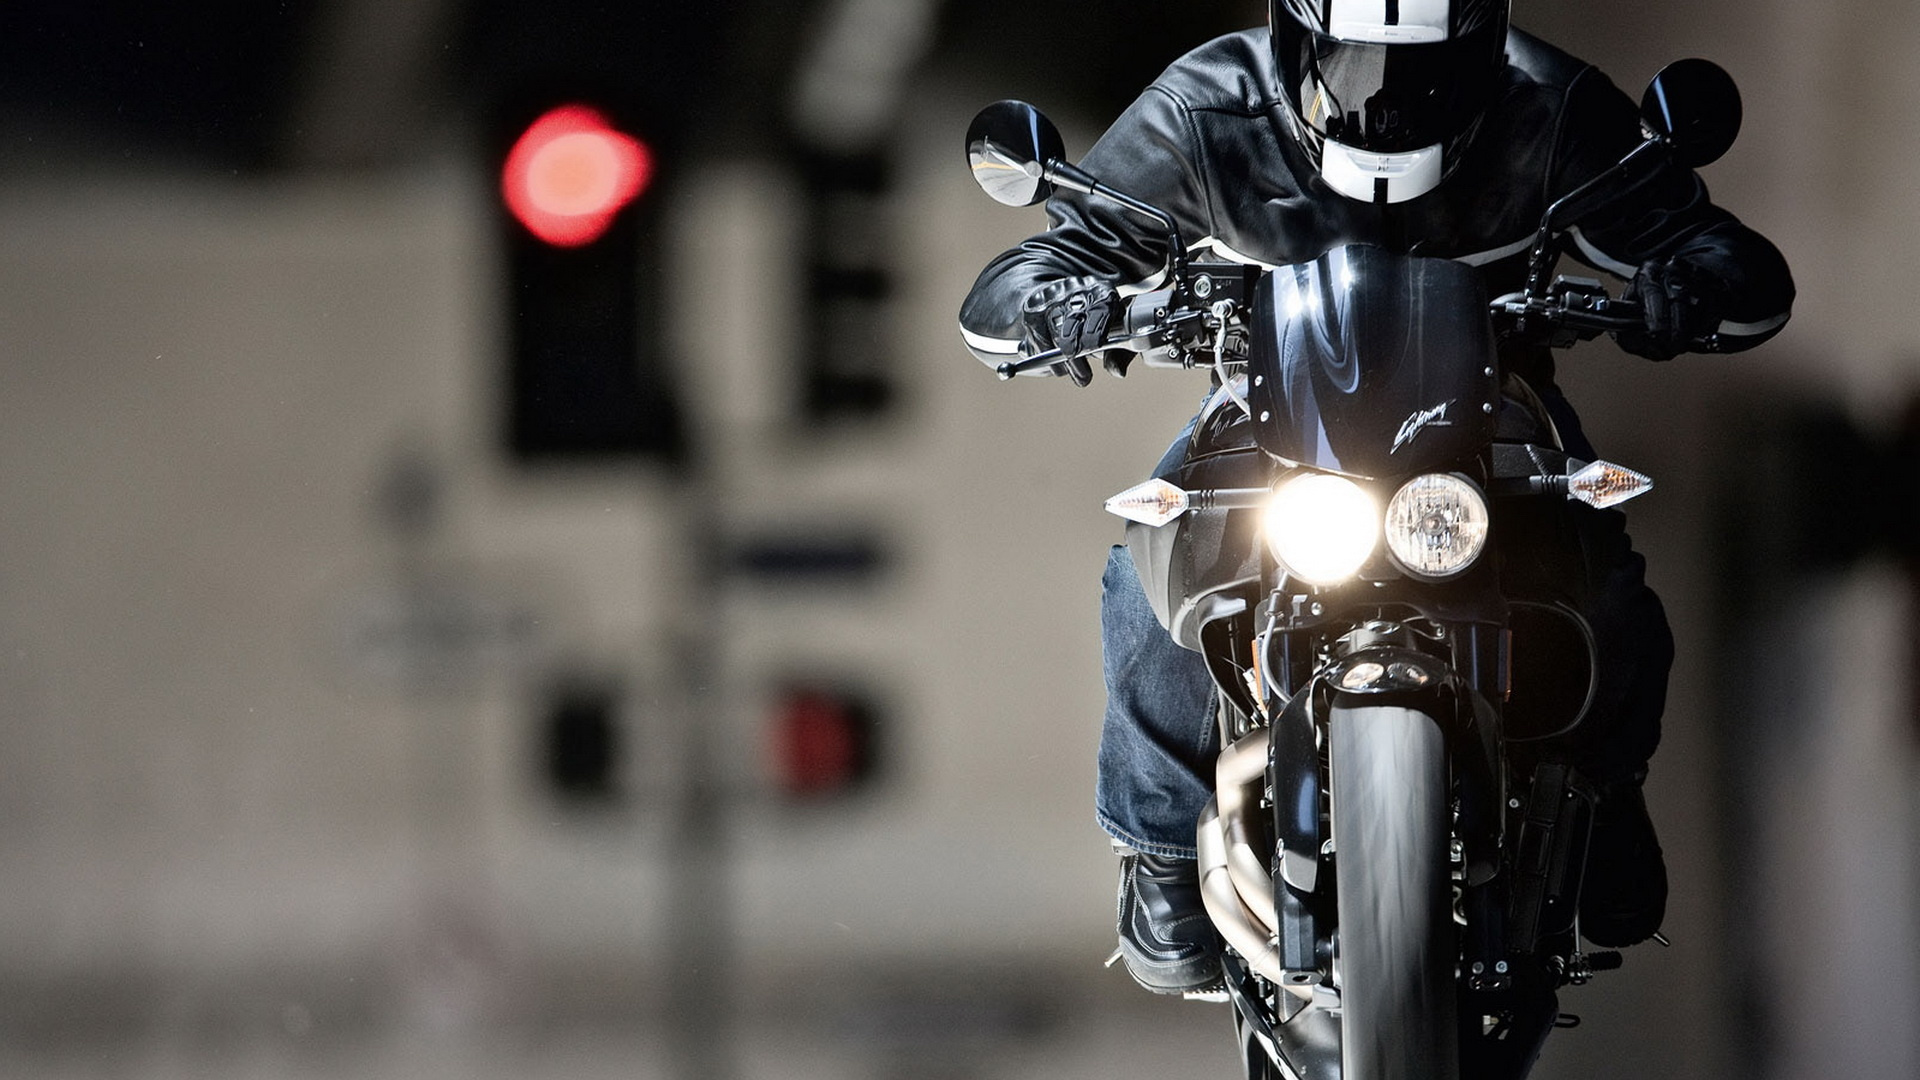 Man in Blue and Black Motorcycle Helmet Riding Motorcycle. Wallpaper in 1920x1080 Resolution